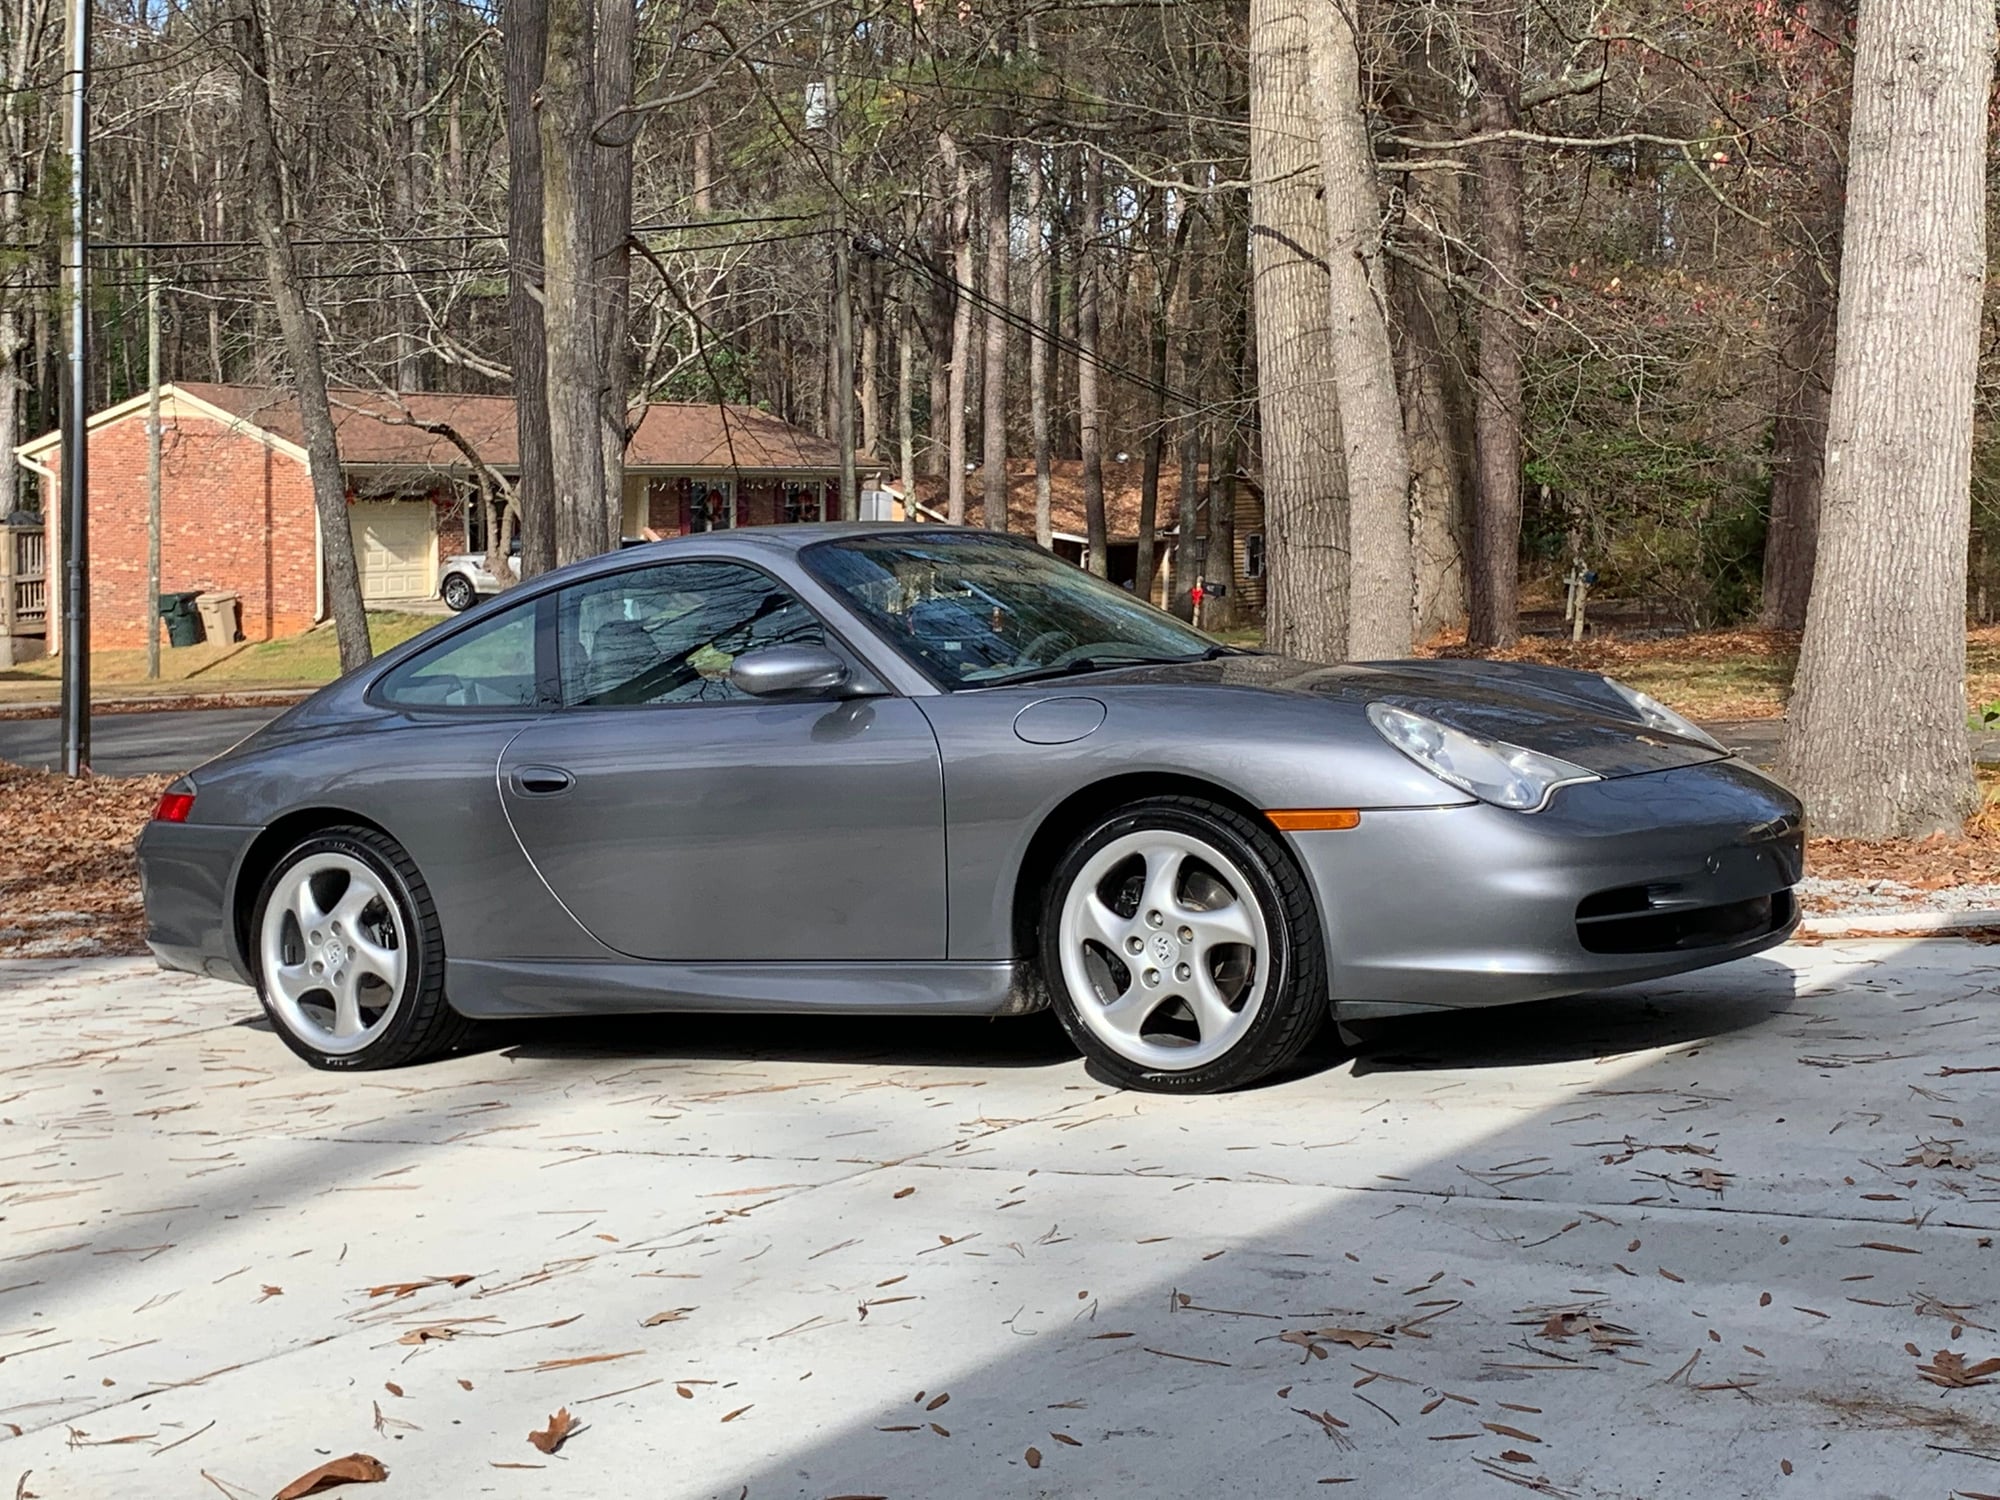 2002 Porsche 911 - 2002 Porsche 911 Carrera 2 Seal Grey with Graphite Grey interior - Used - VIN WP0AA29902S621468 - 90,000 Miles - 6 cyl - 2WD - Manual - Coupe - Gray - Raleigh, NC 27529, United States